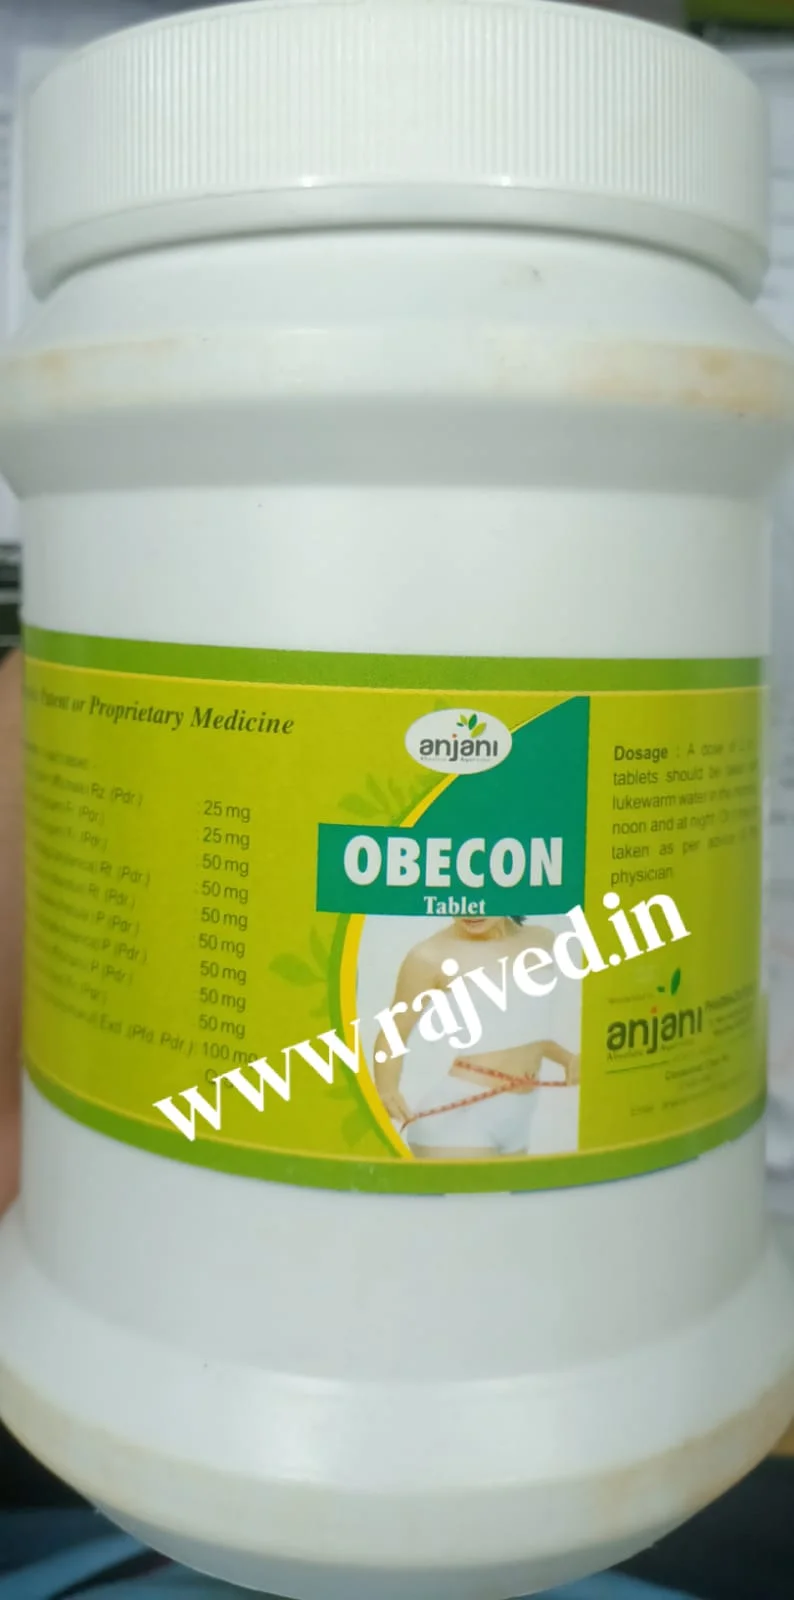 obecon tablet 60 tab upto 20% off Anjani Pharmaceuticals